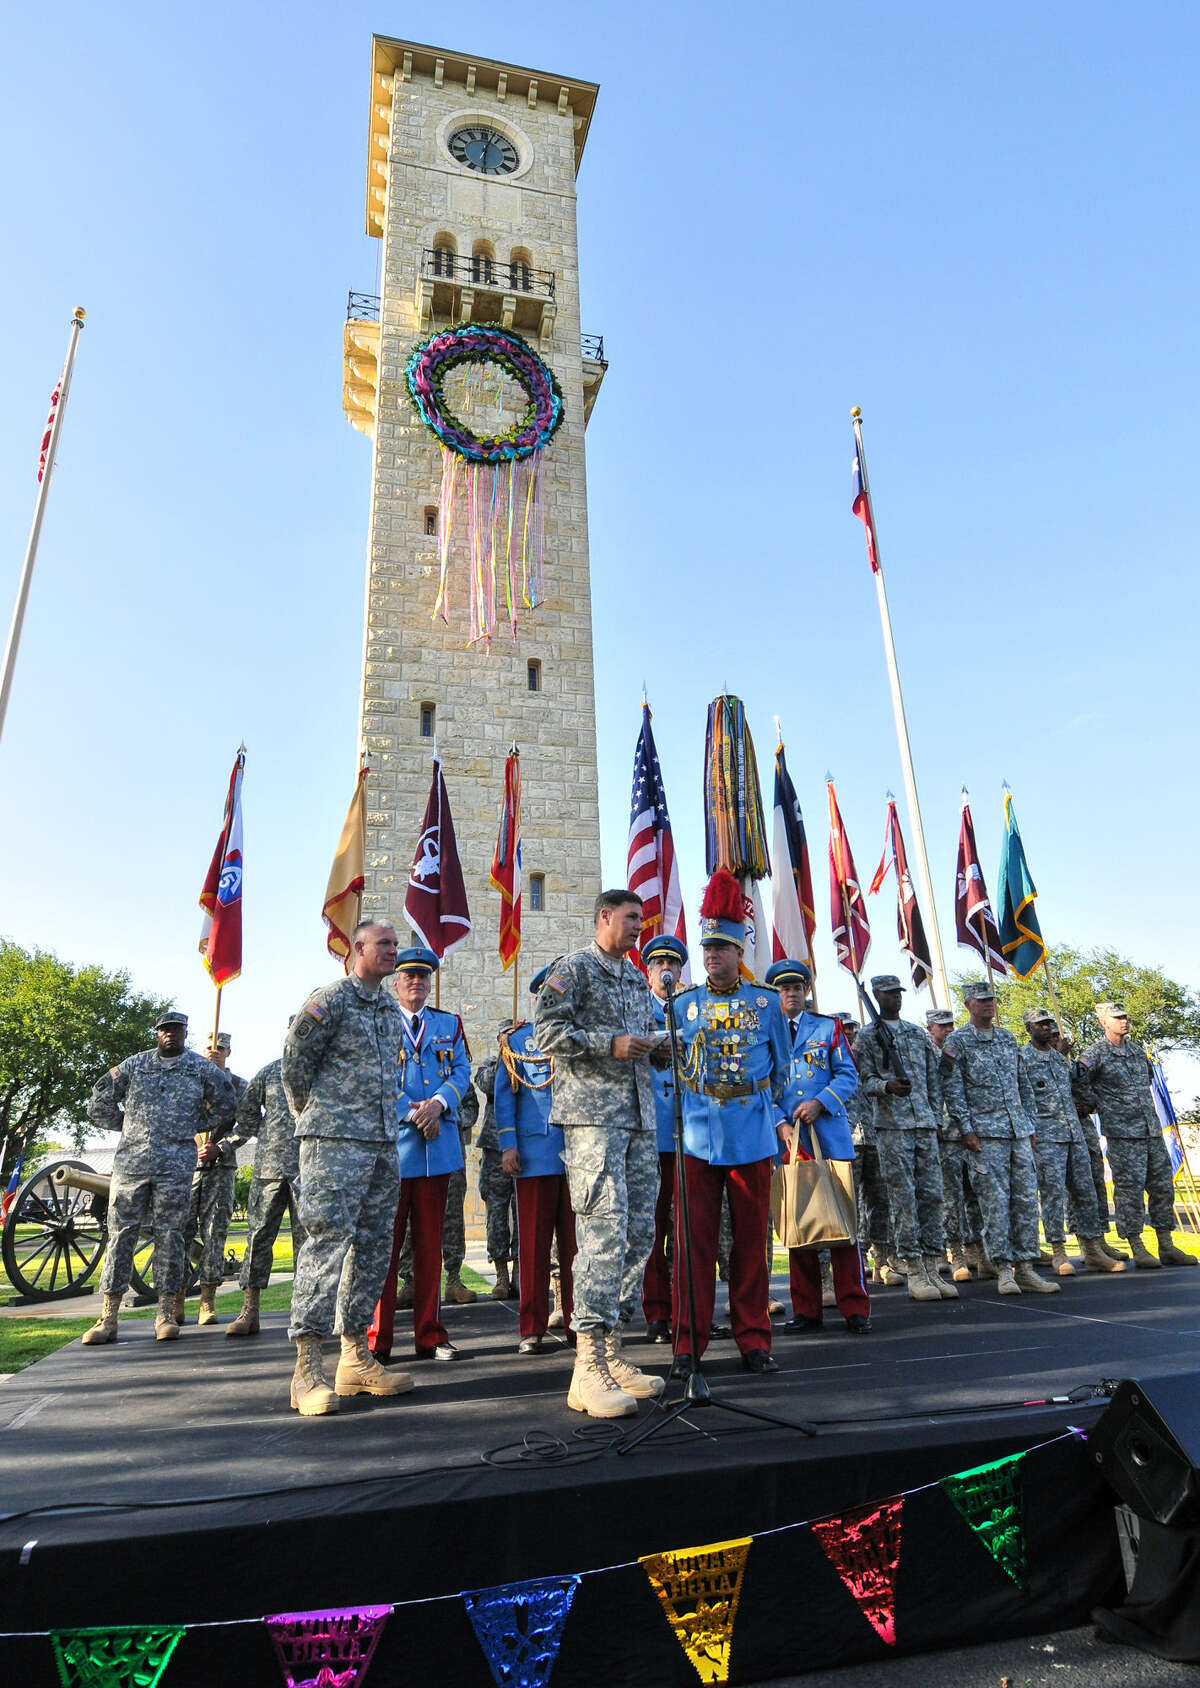 Maj. Gen. Frederick Rudesheim (at the microphone) presents King Antonio Steve Dutton with signed letters of appreciation from Army Command during the Joint Base San Antonio-Fort Sam Houston's Fiesta celebration.